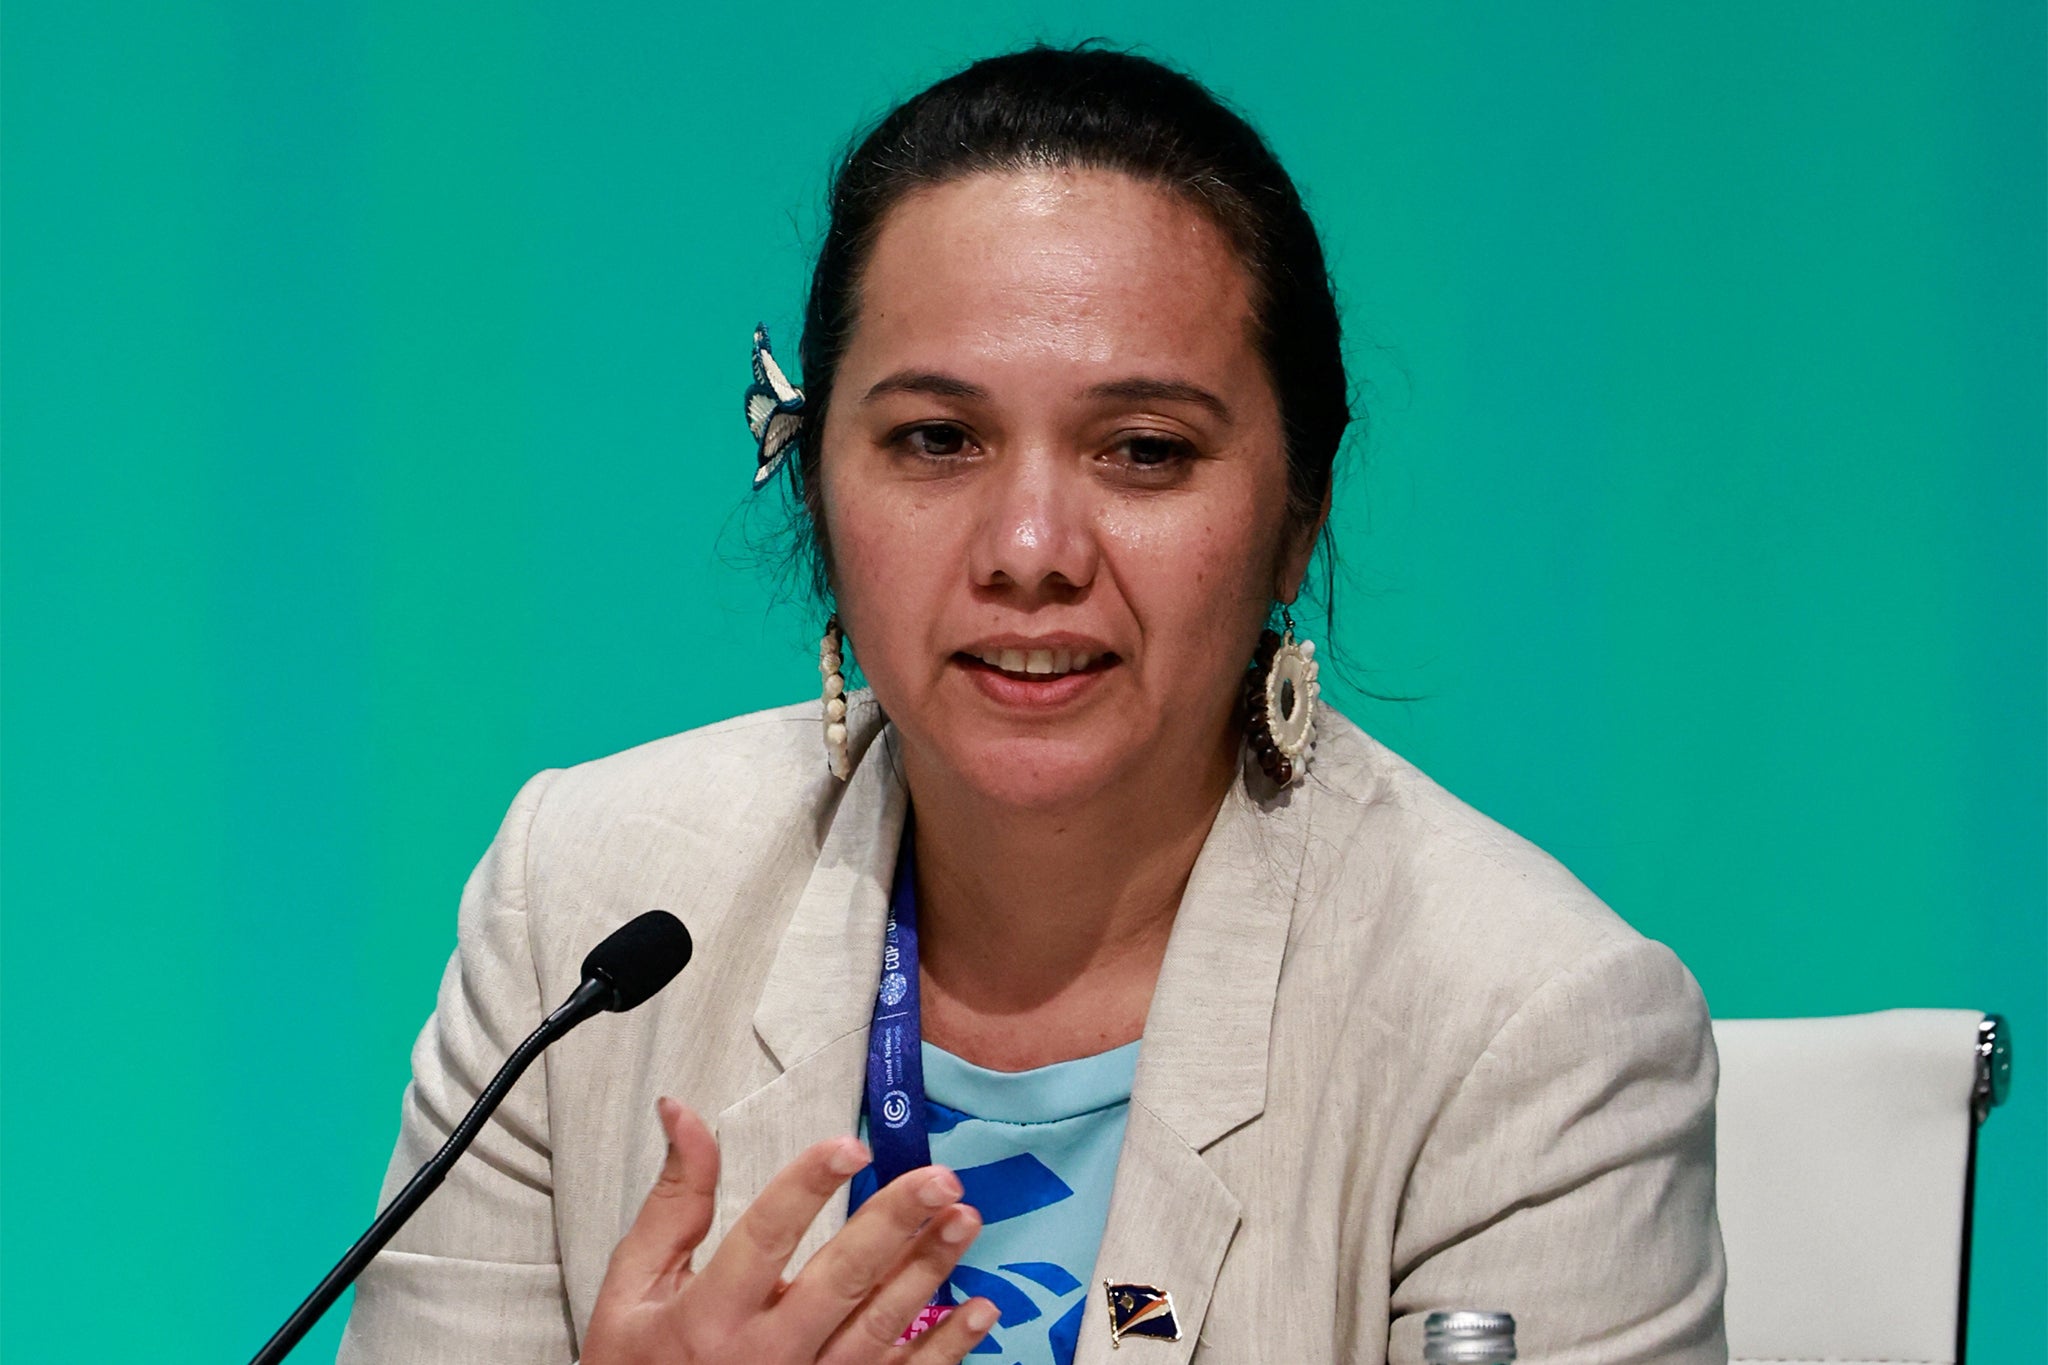 Climate Envoy for the Marshall Islands Tina Stege speaks during a press conference at Cop28 on 11 December in Dubai